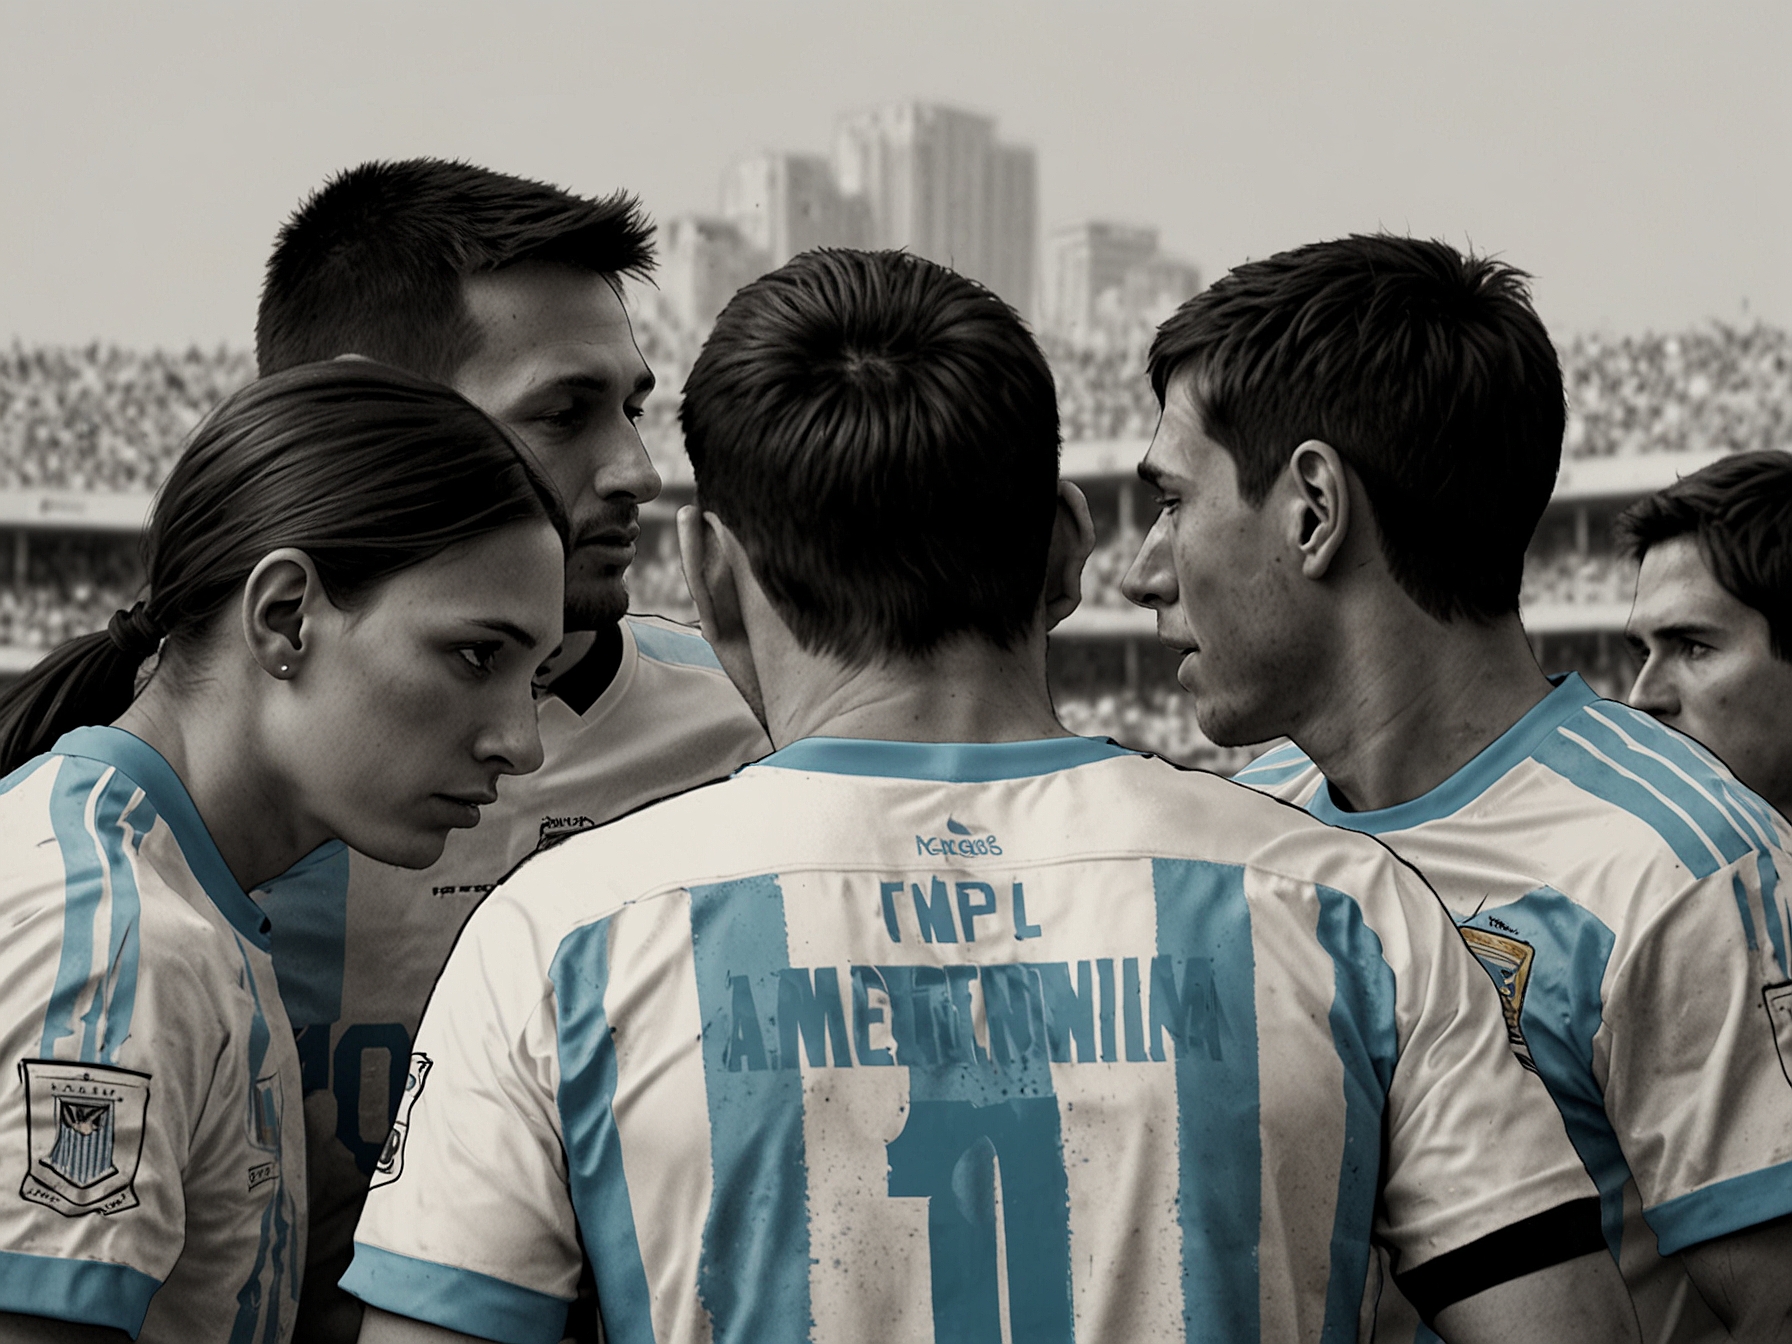 Argentina's team huddled together, strategizing intensely in a stadium without Lionel Messi, showing unity and determination to face the match against Peru without their star player.